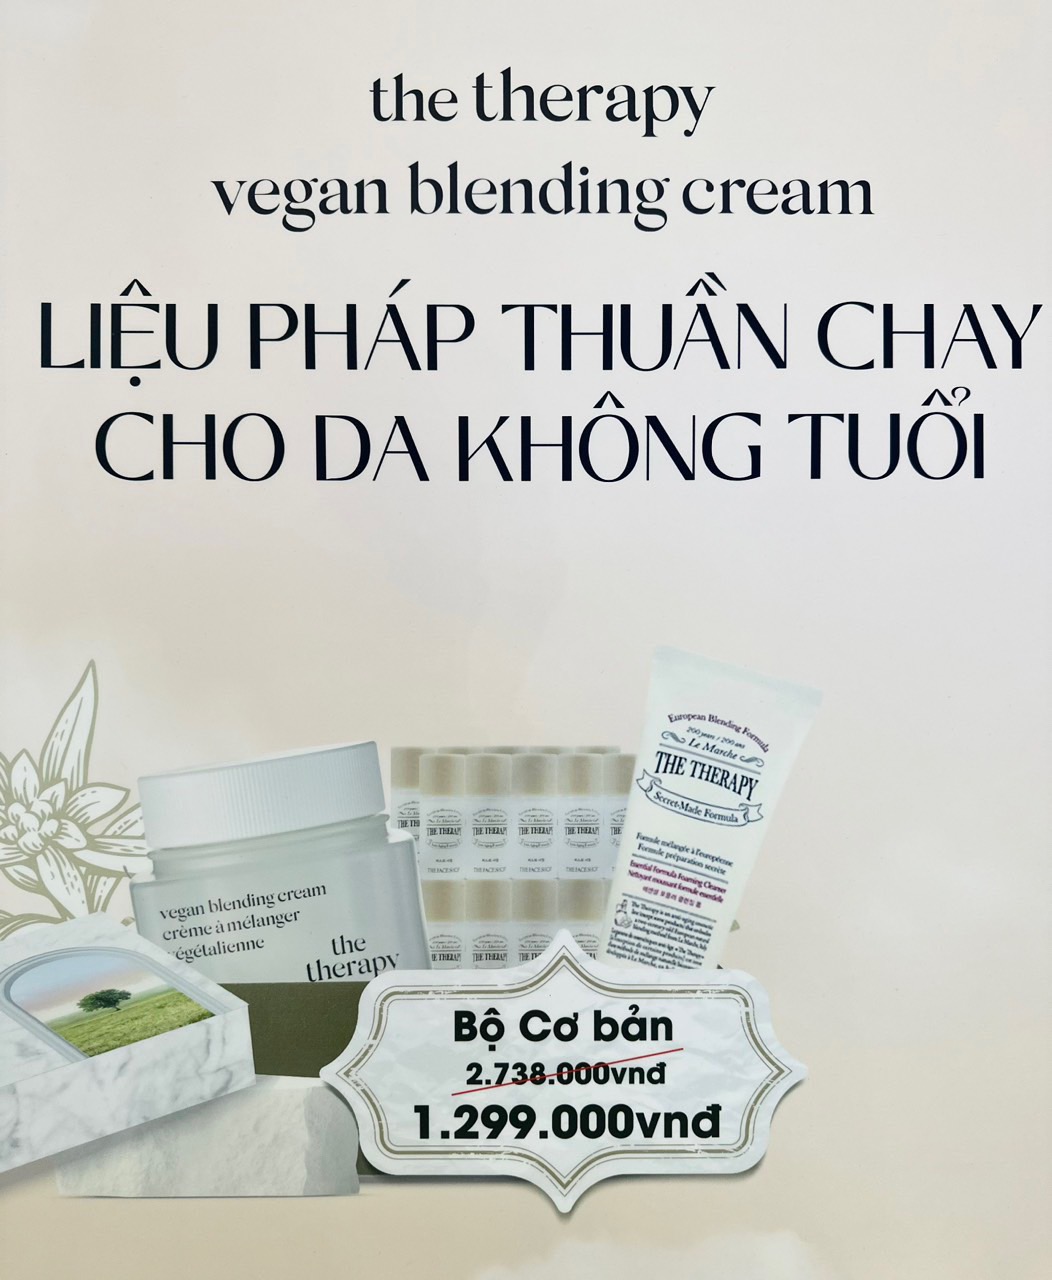 NEW! THE THERAPY VEGAN BLENDING LINE FROM THE FACE SHOP